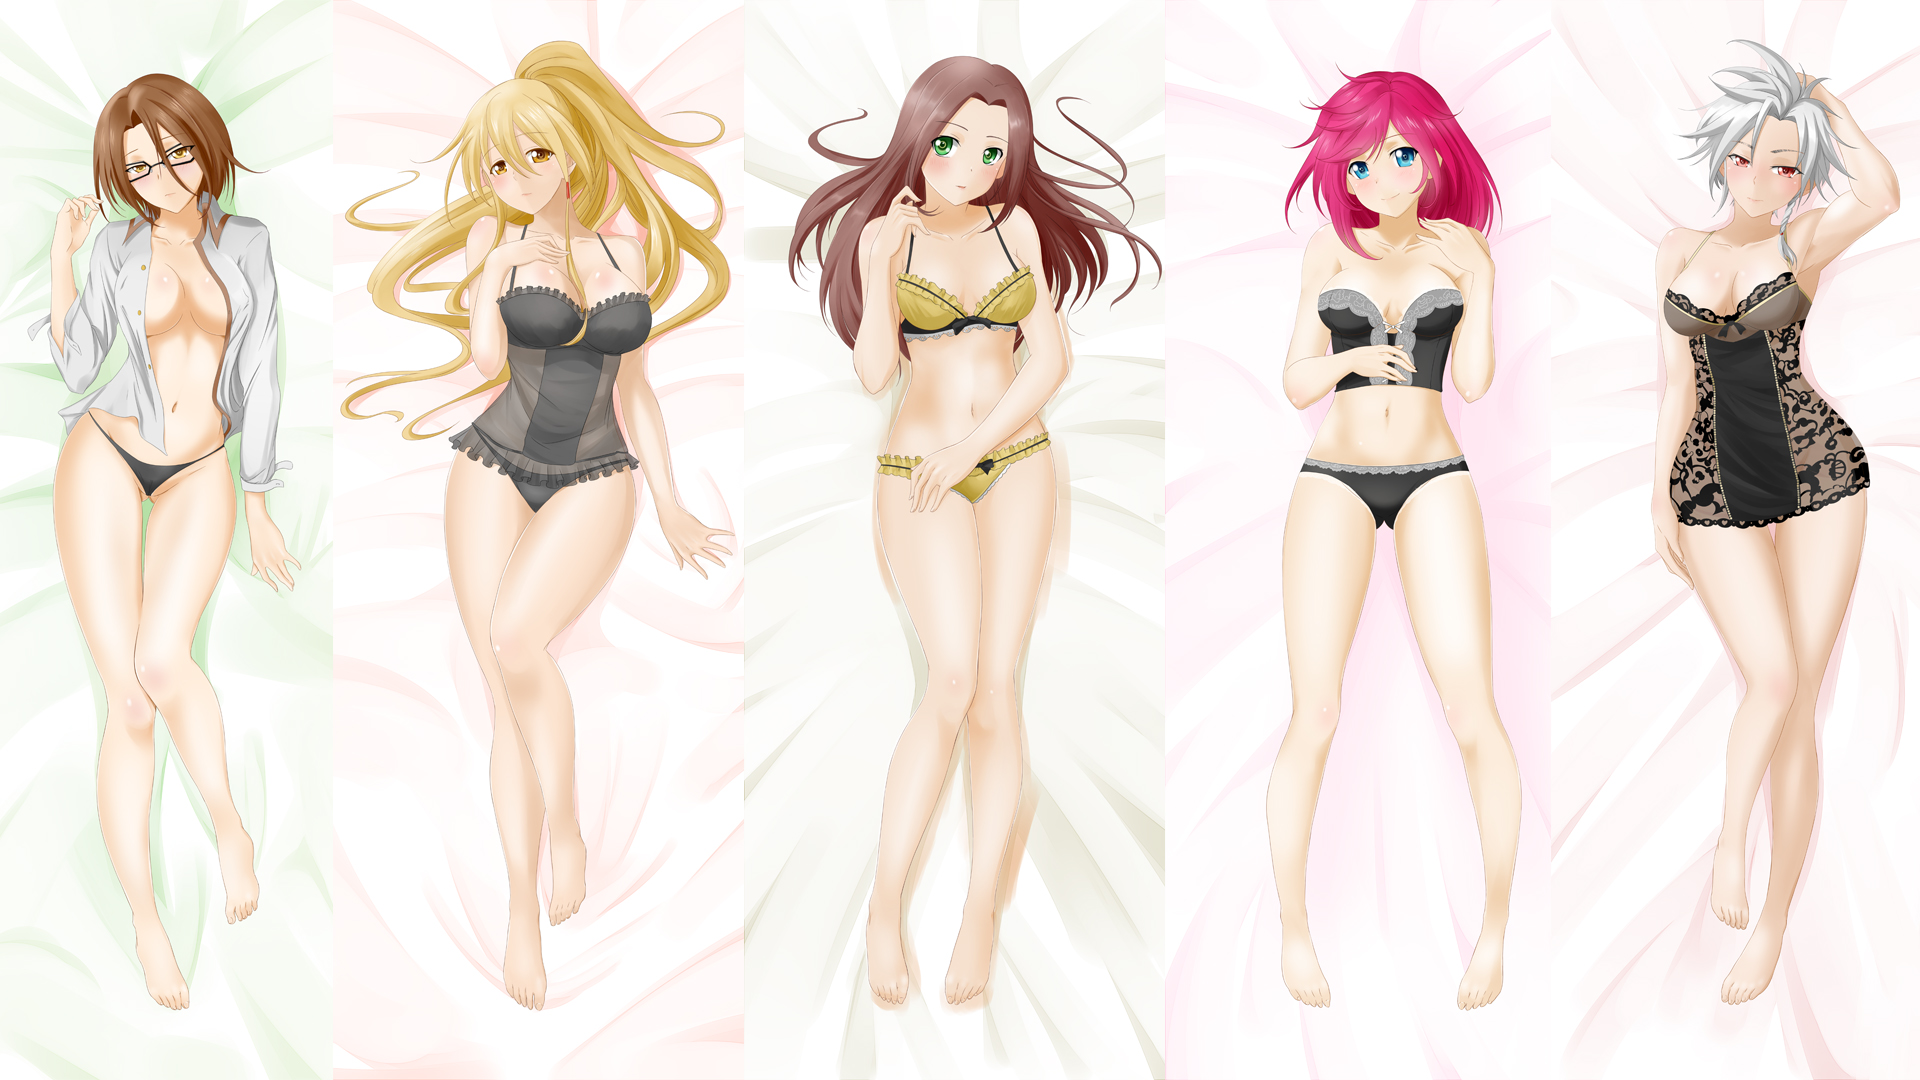 A collection of Dakimakura digital images in full high resolution of the fi...